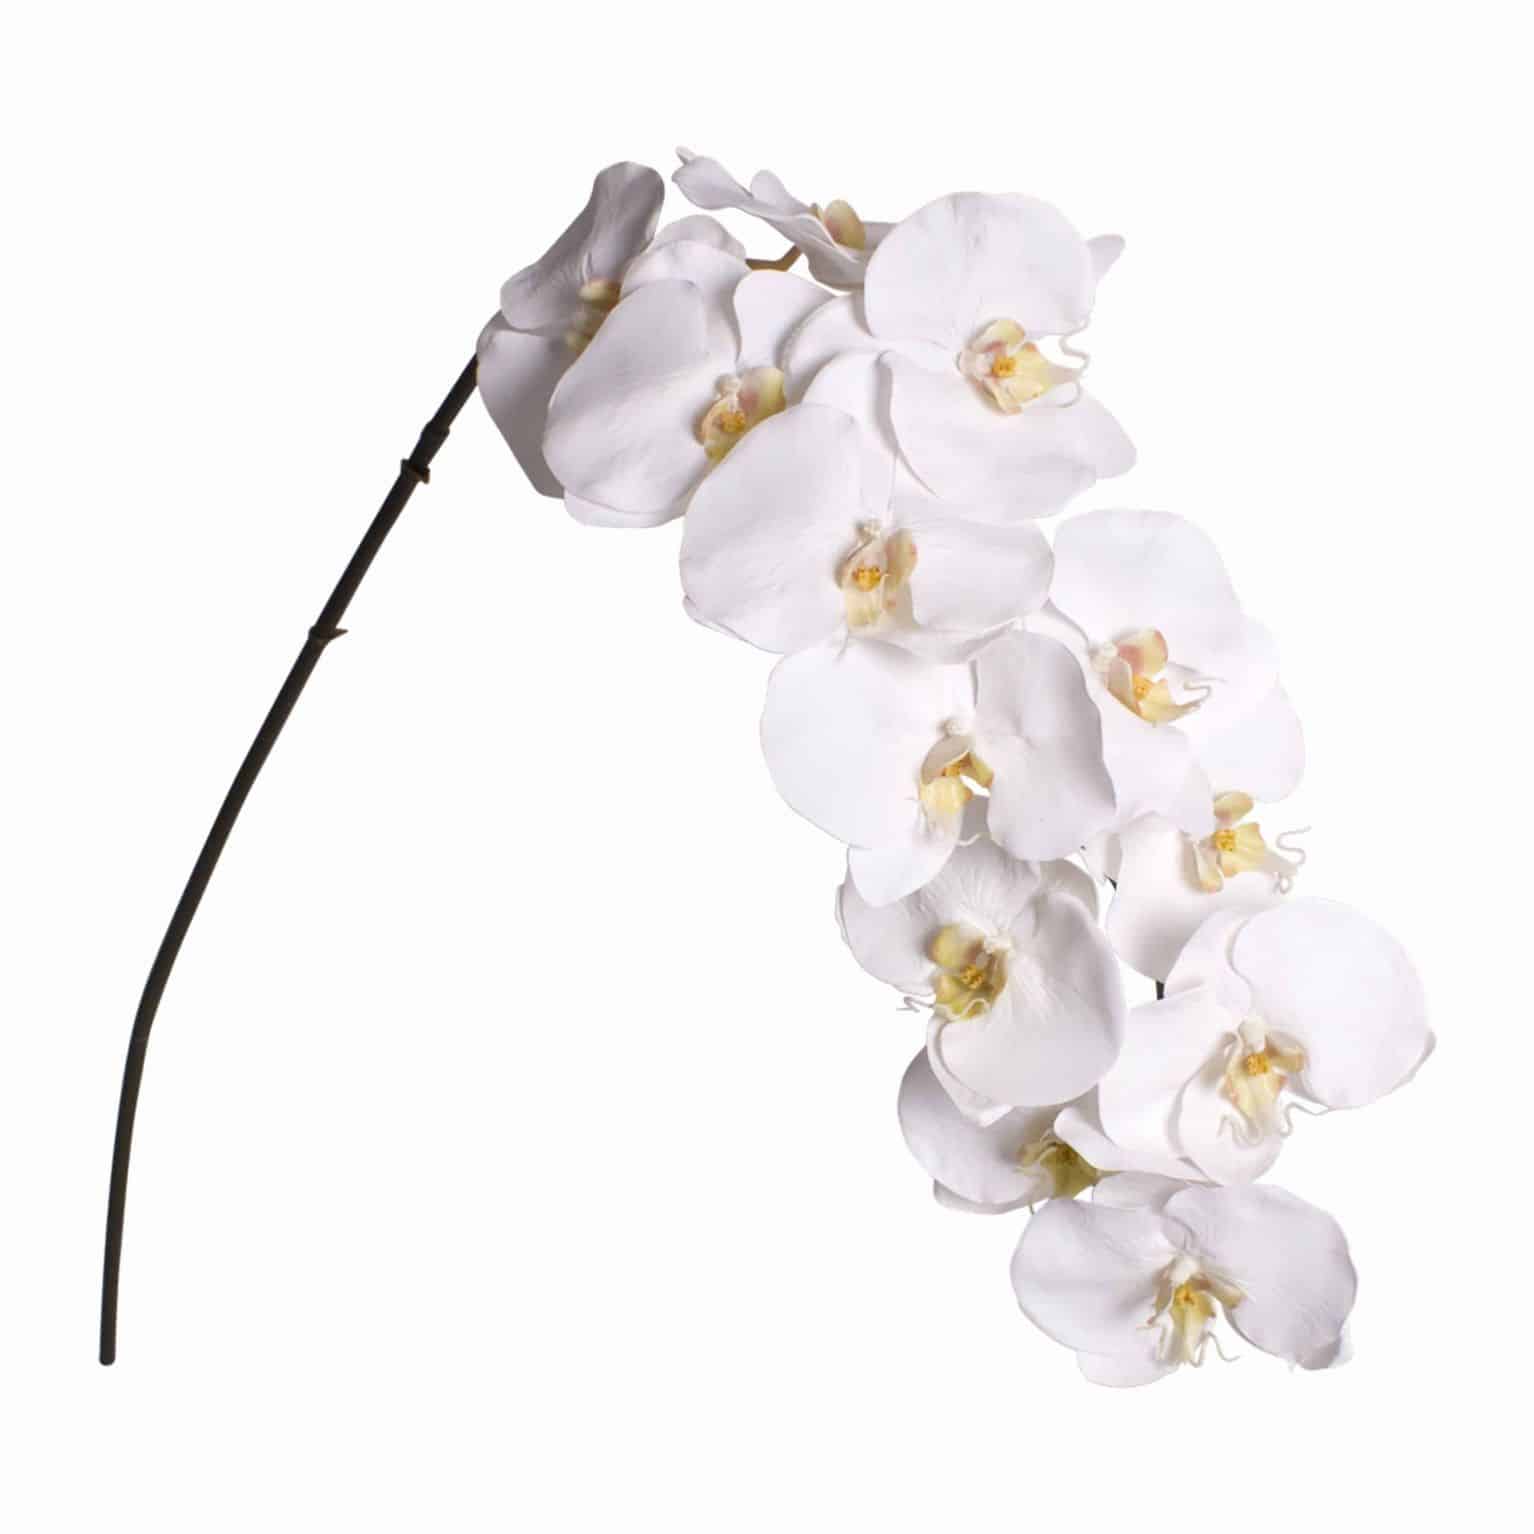 Buy classic white phalaenopsis orchid faux flower for your arrangements. Incredibly detailed lifelike pollen